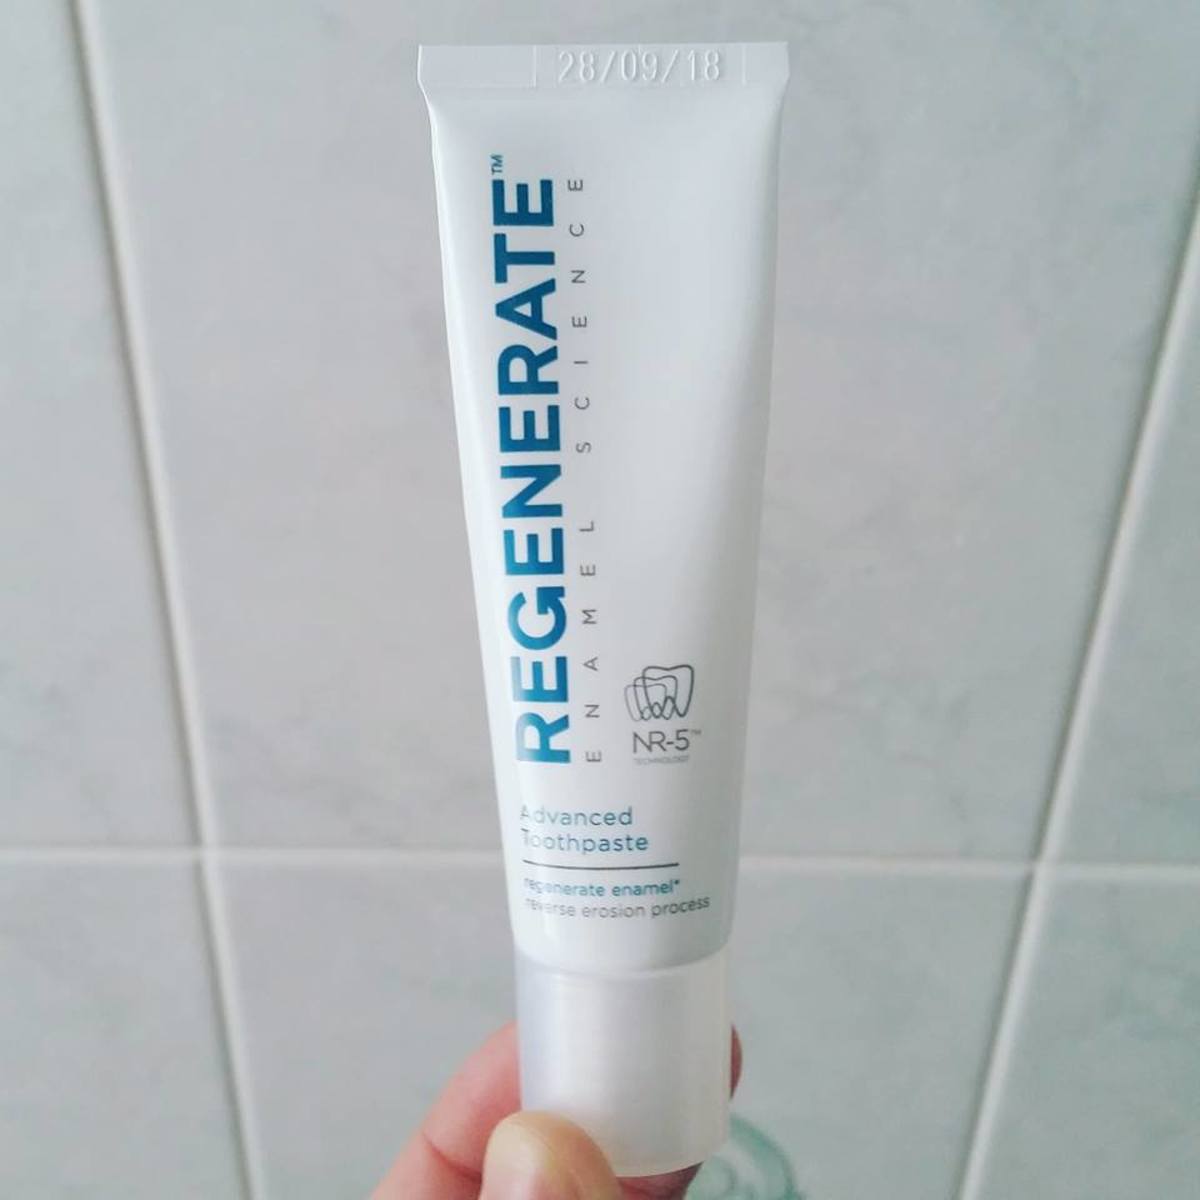 My Review of Regenerate Enamel Science Advanced Toothpaste